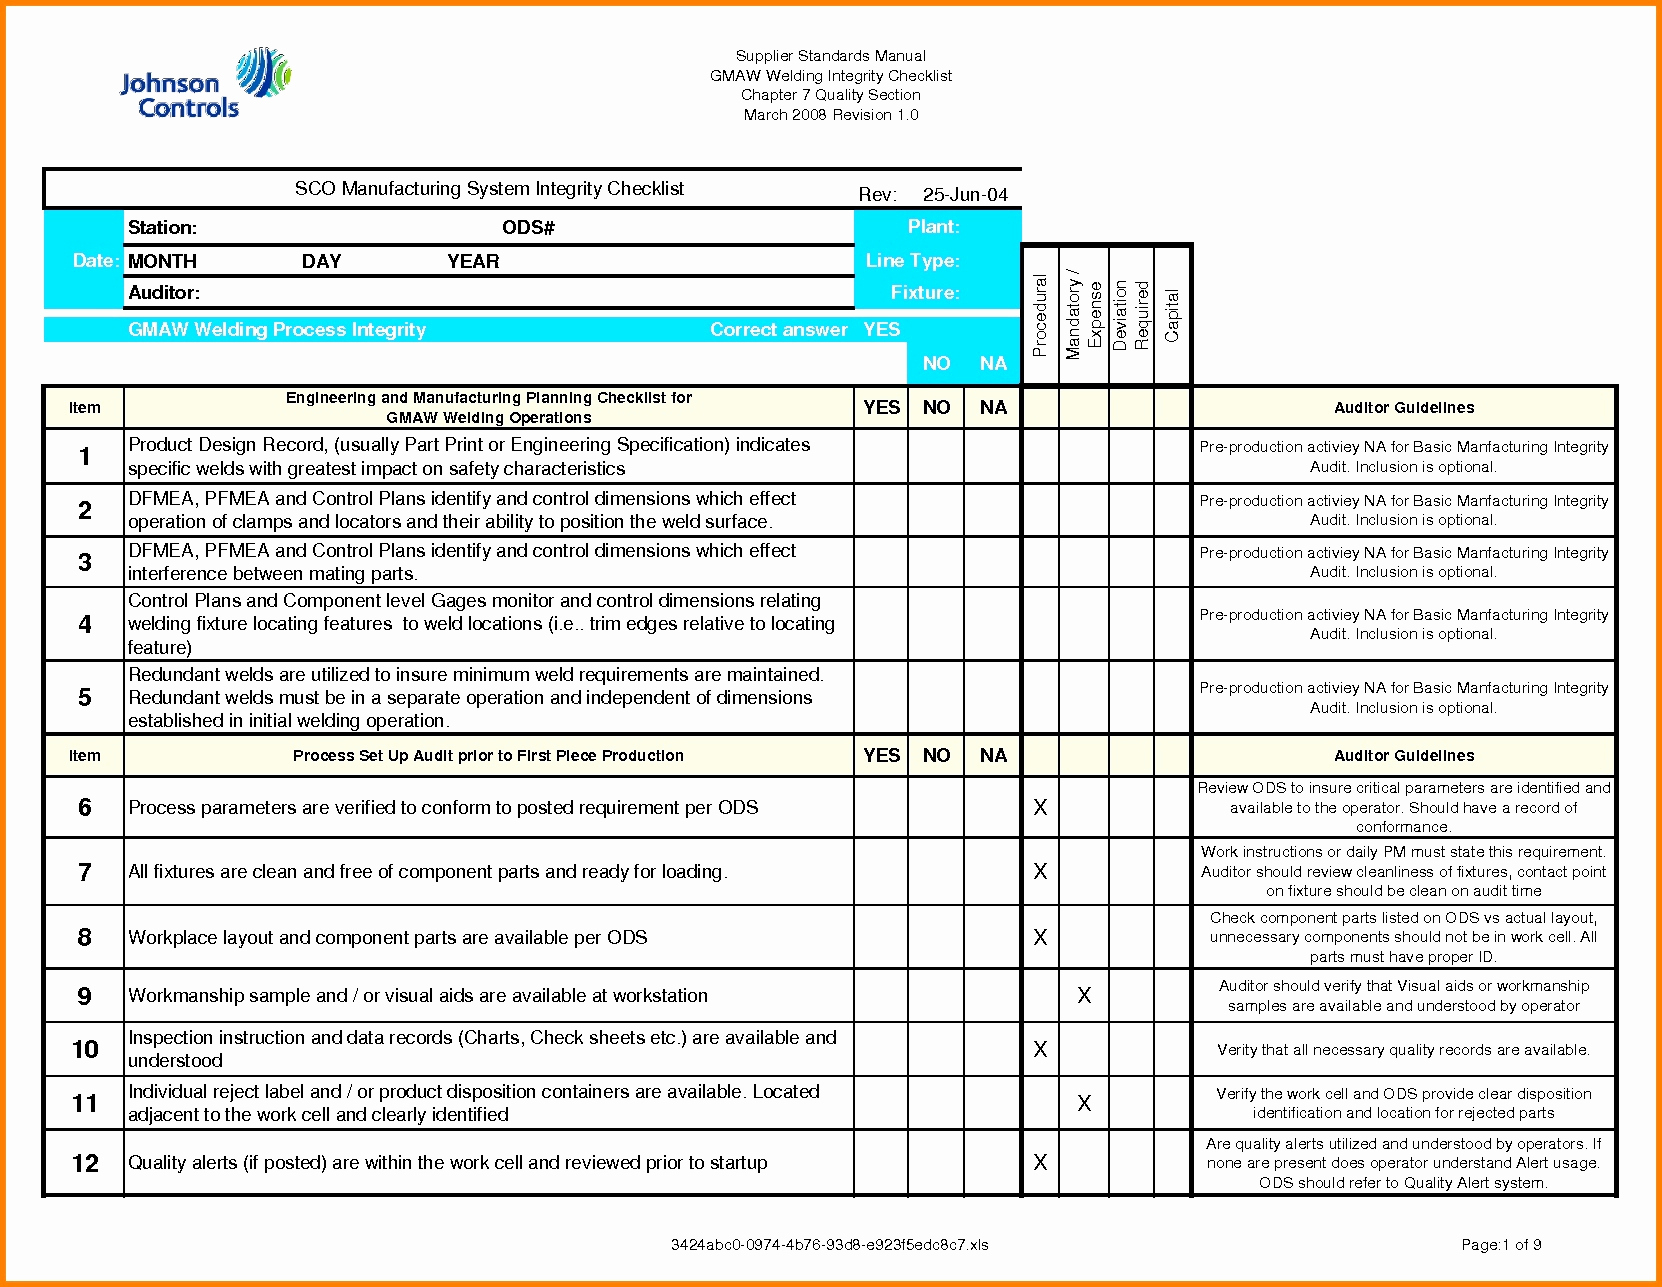 800 53A Spreadsheet Pertaining To Nist 800 53A Rev 4 Spreadsheet Lovely Nist 800 53A Rev 4 Spreadsheet